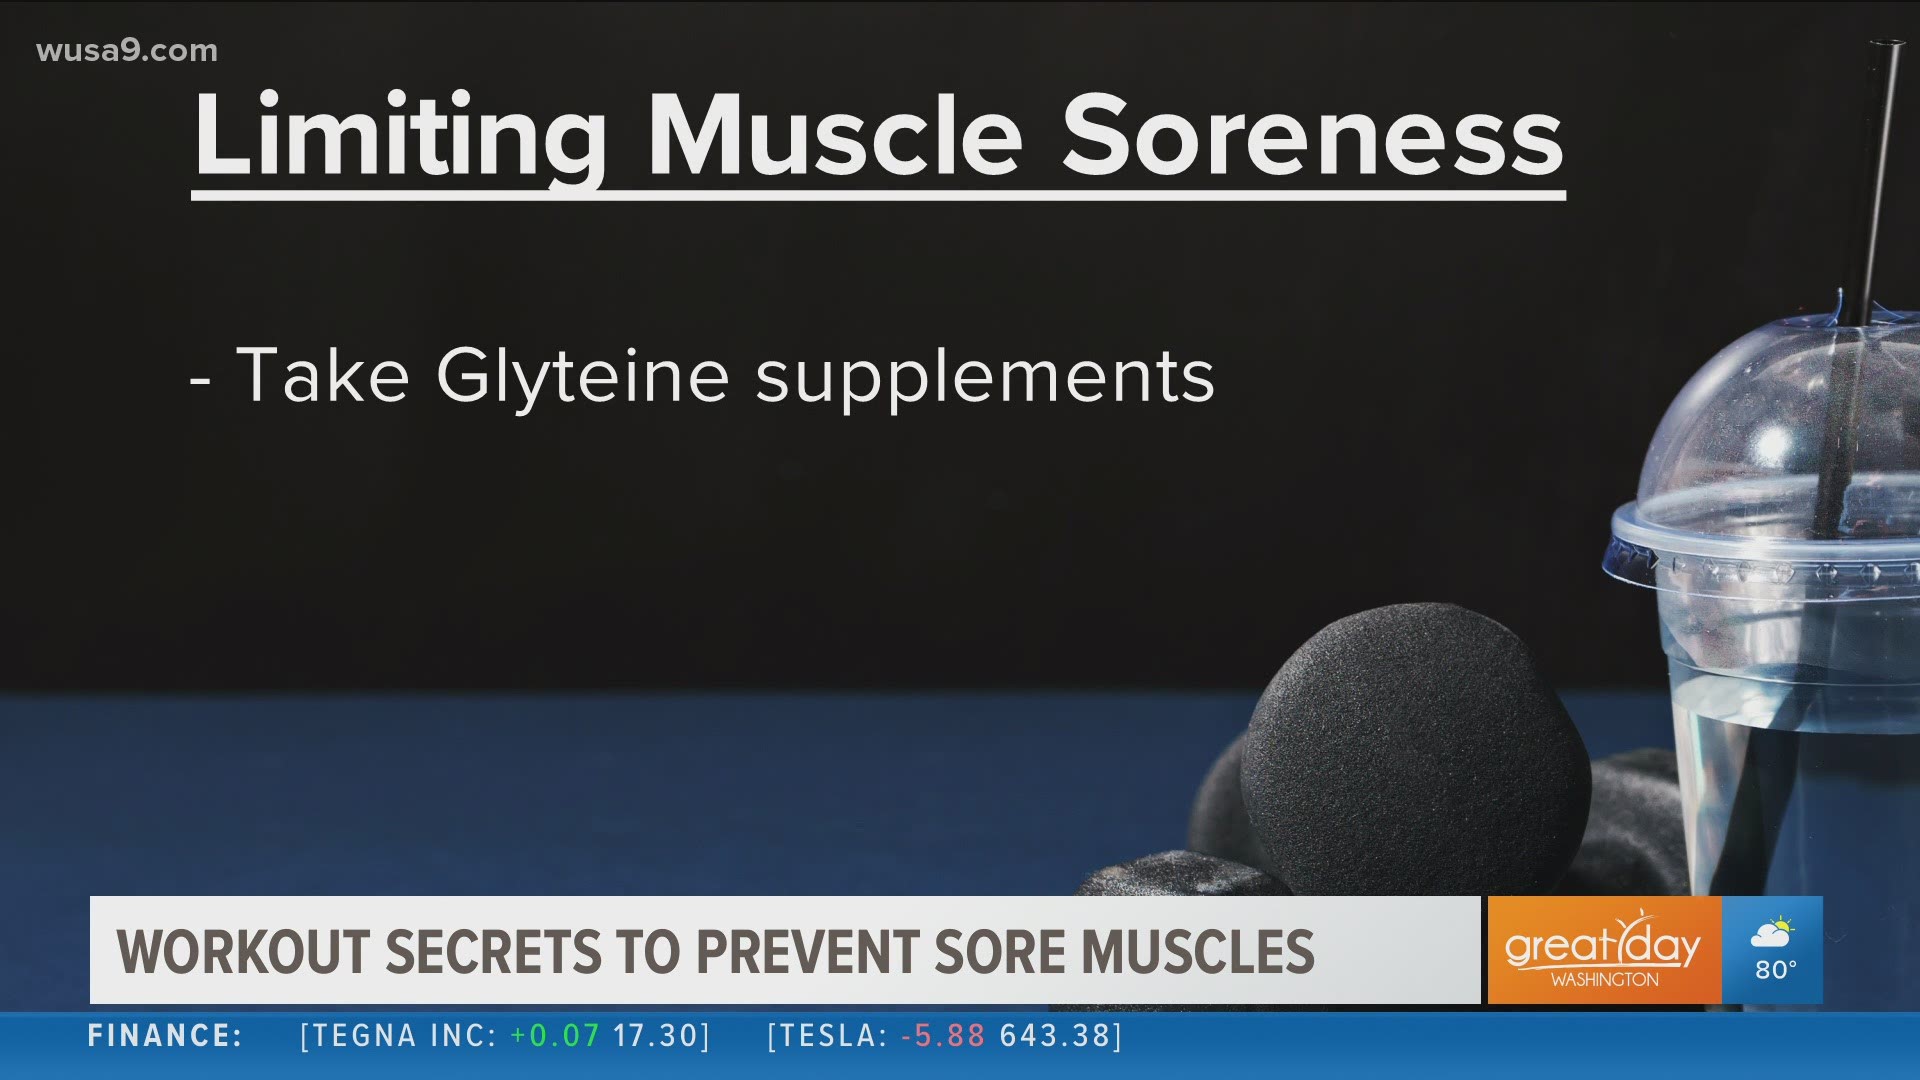 Celebrity trainer Brent Bishop shares tips on avoiding muscle soreness.